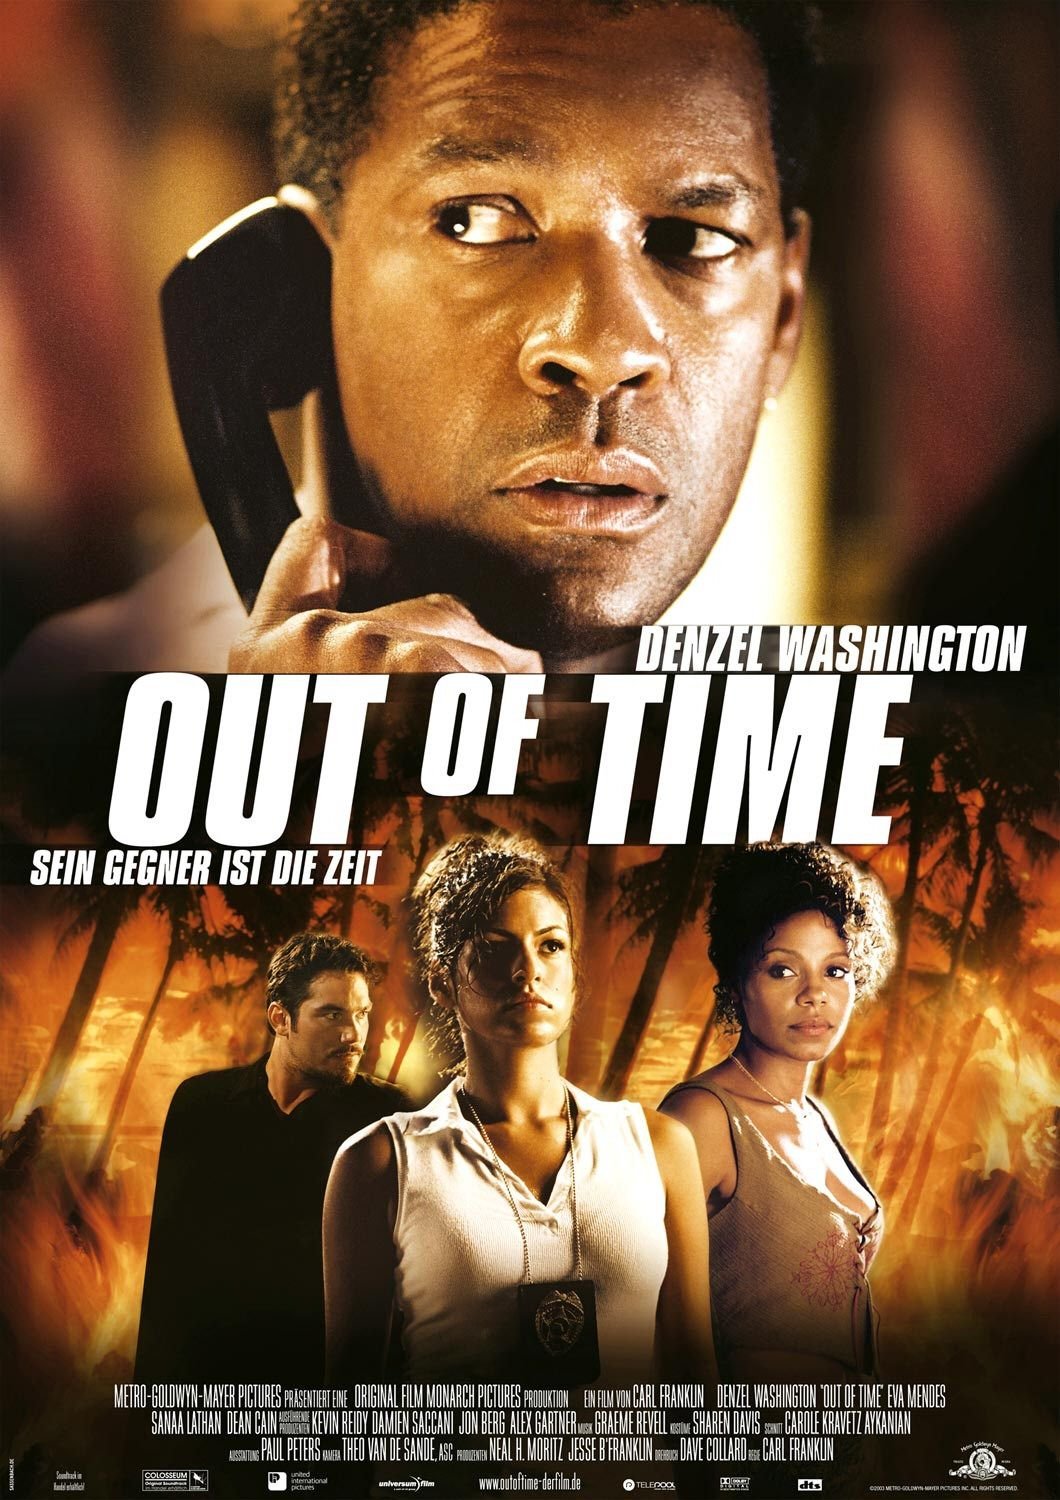 Poster of the movie Out of Time